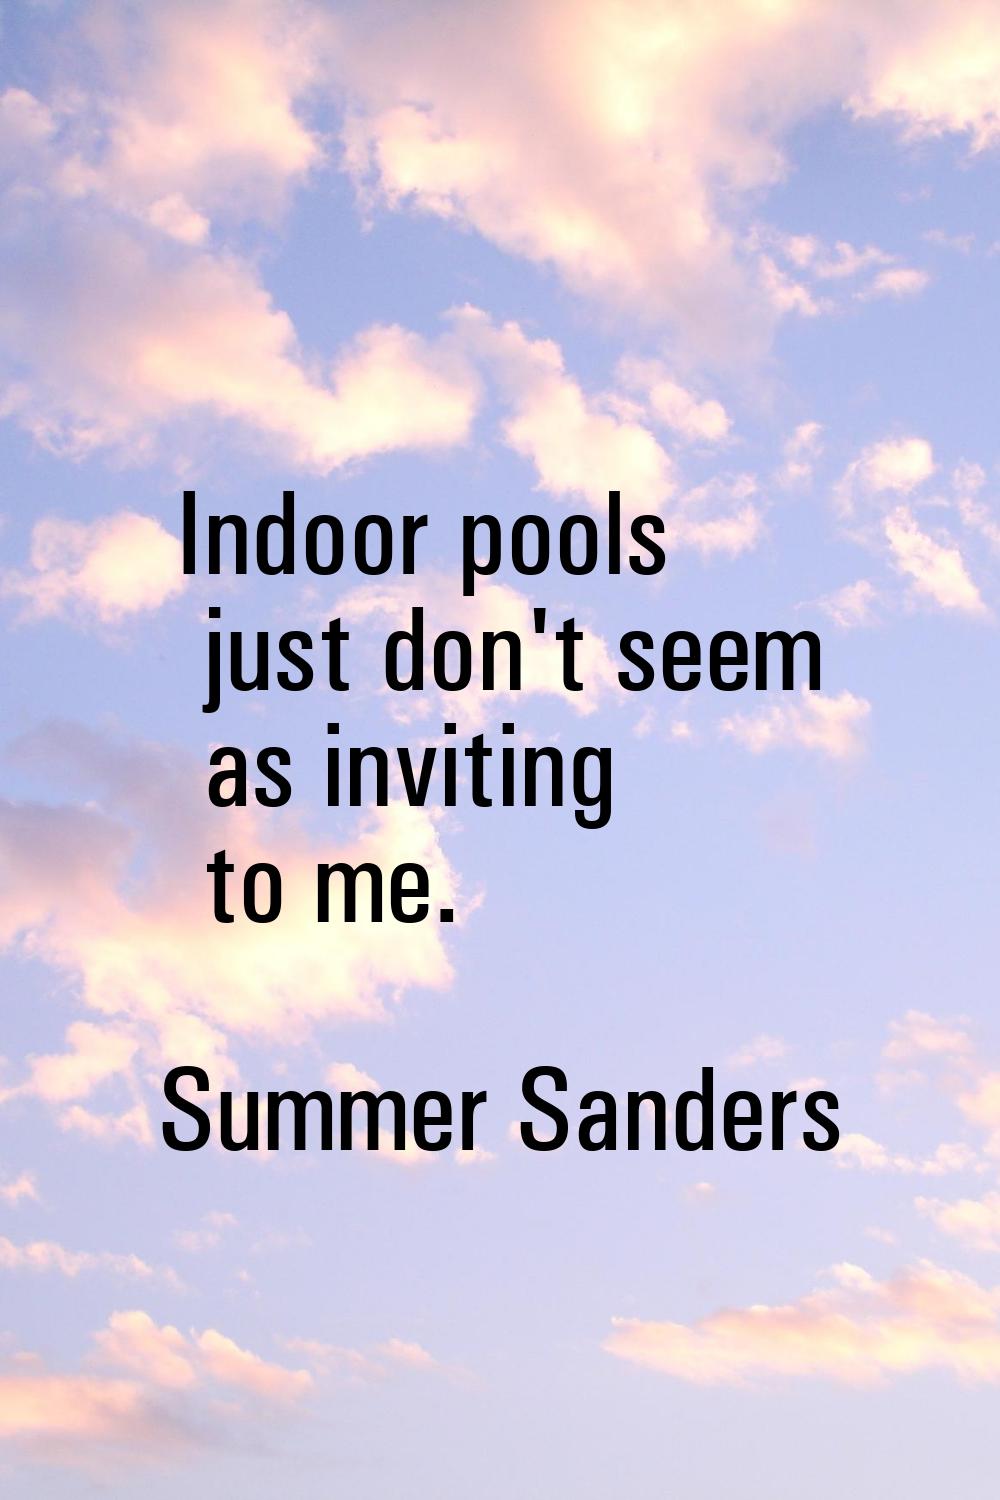 Indoor pools just don't seem as inviting to me.